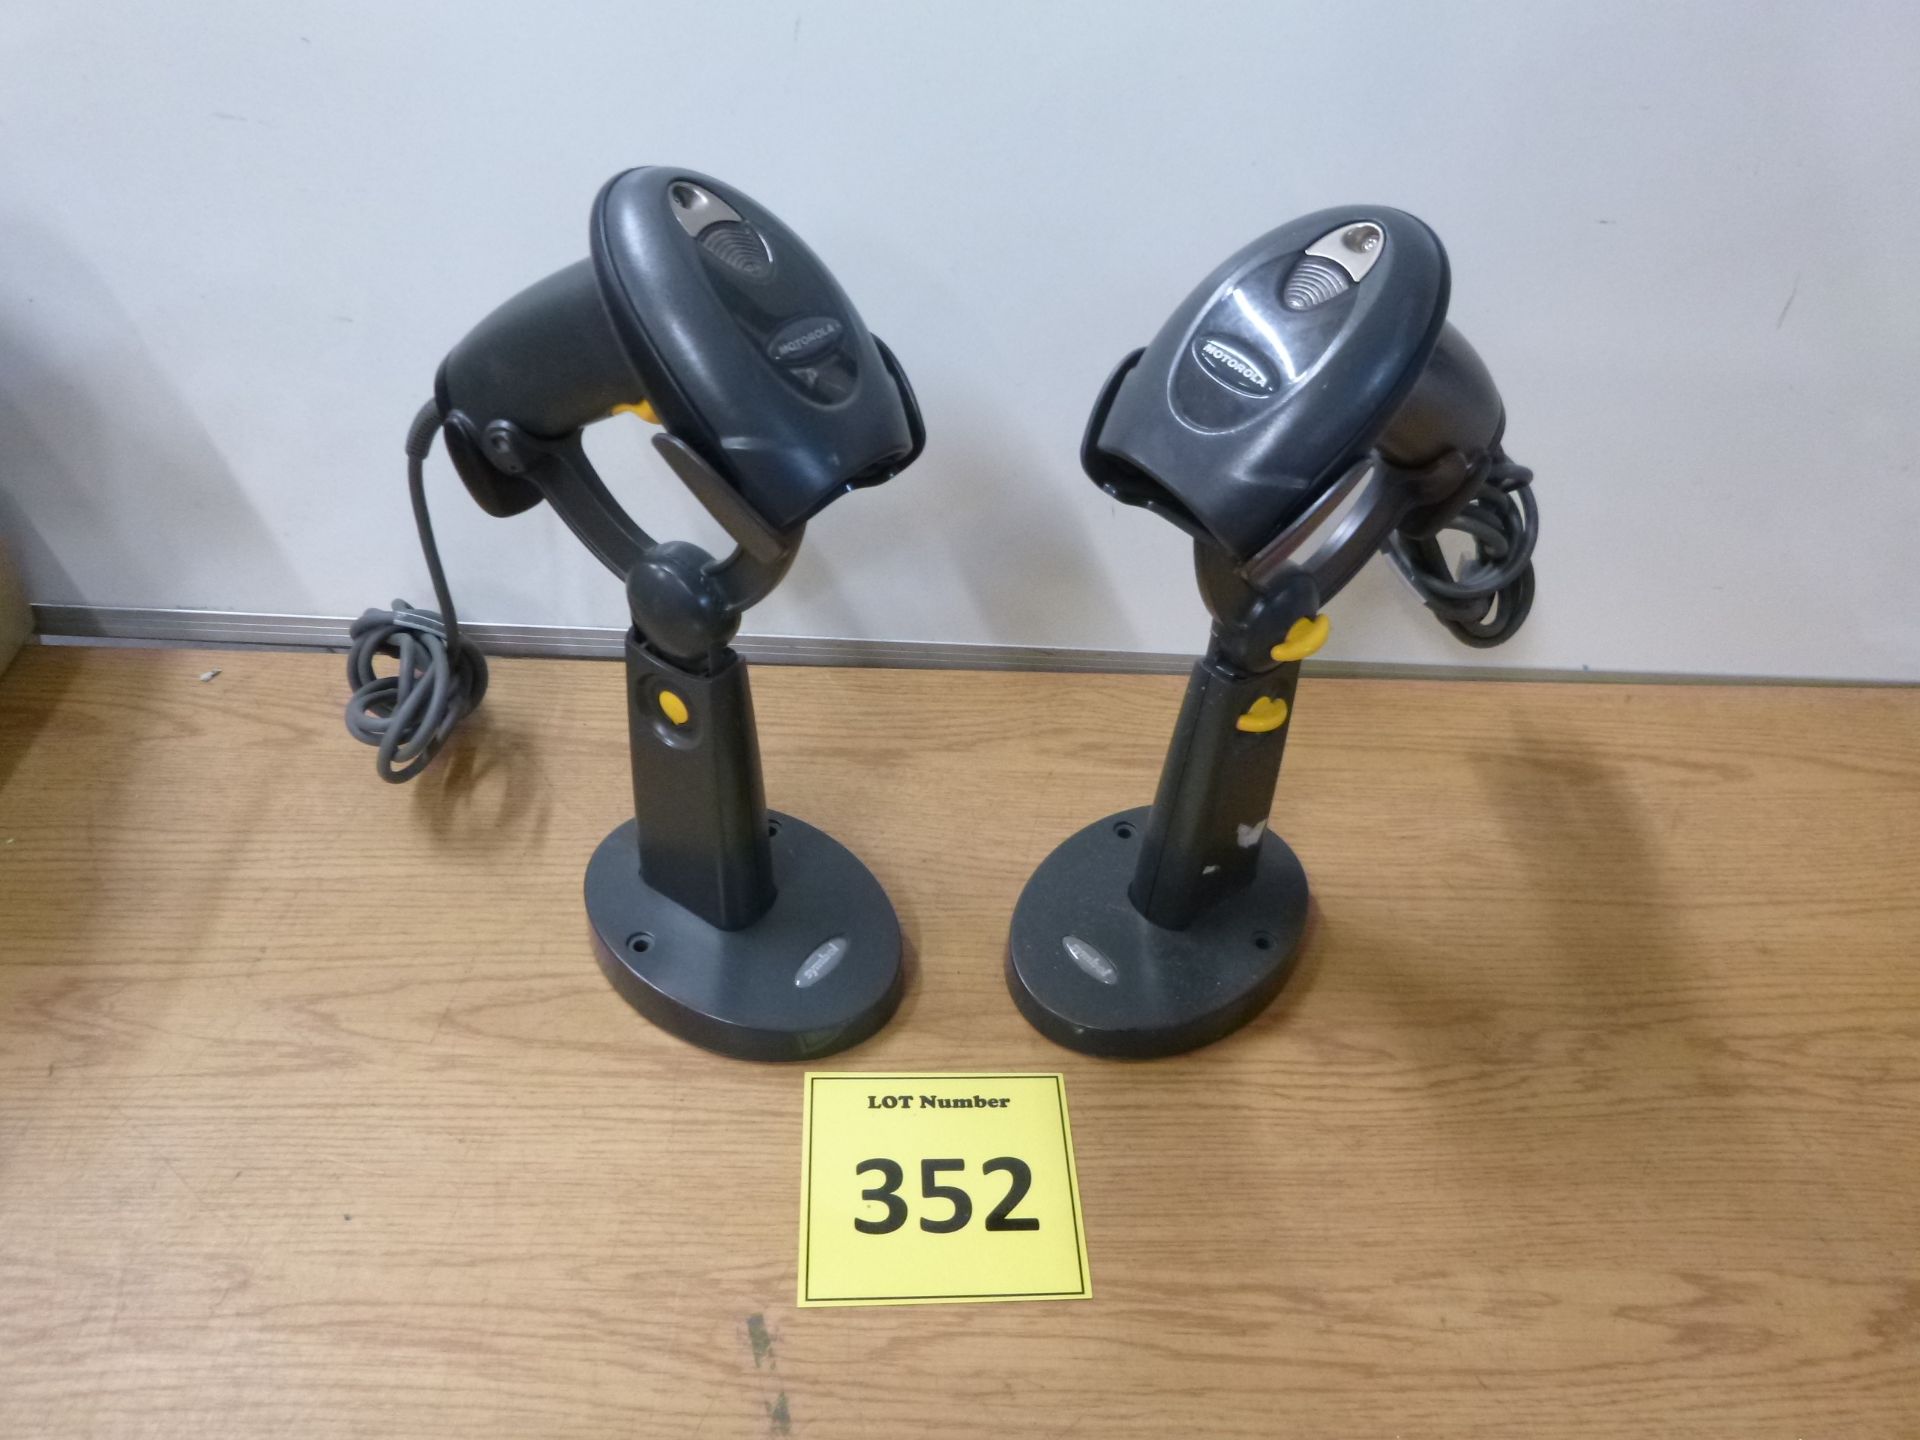 2 X MOTOROLA DS4208 USB HAND HELD BARCODE SCANNERS WITH STANDS. TESTED, WORKING.